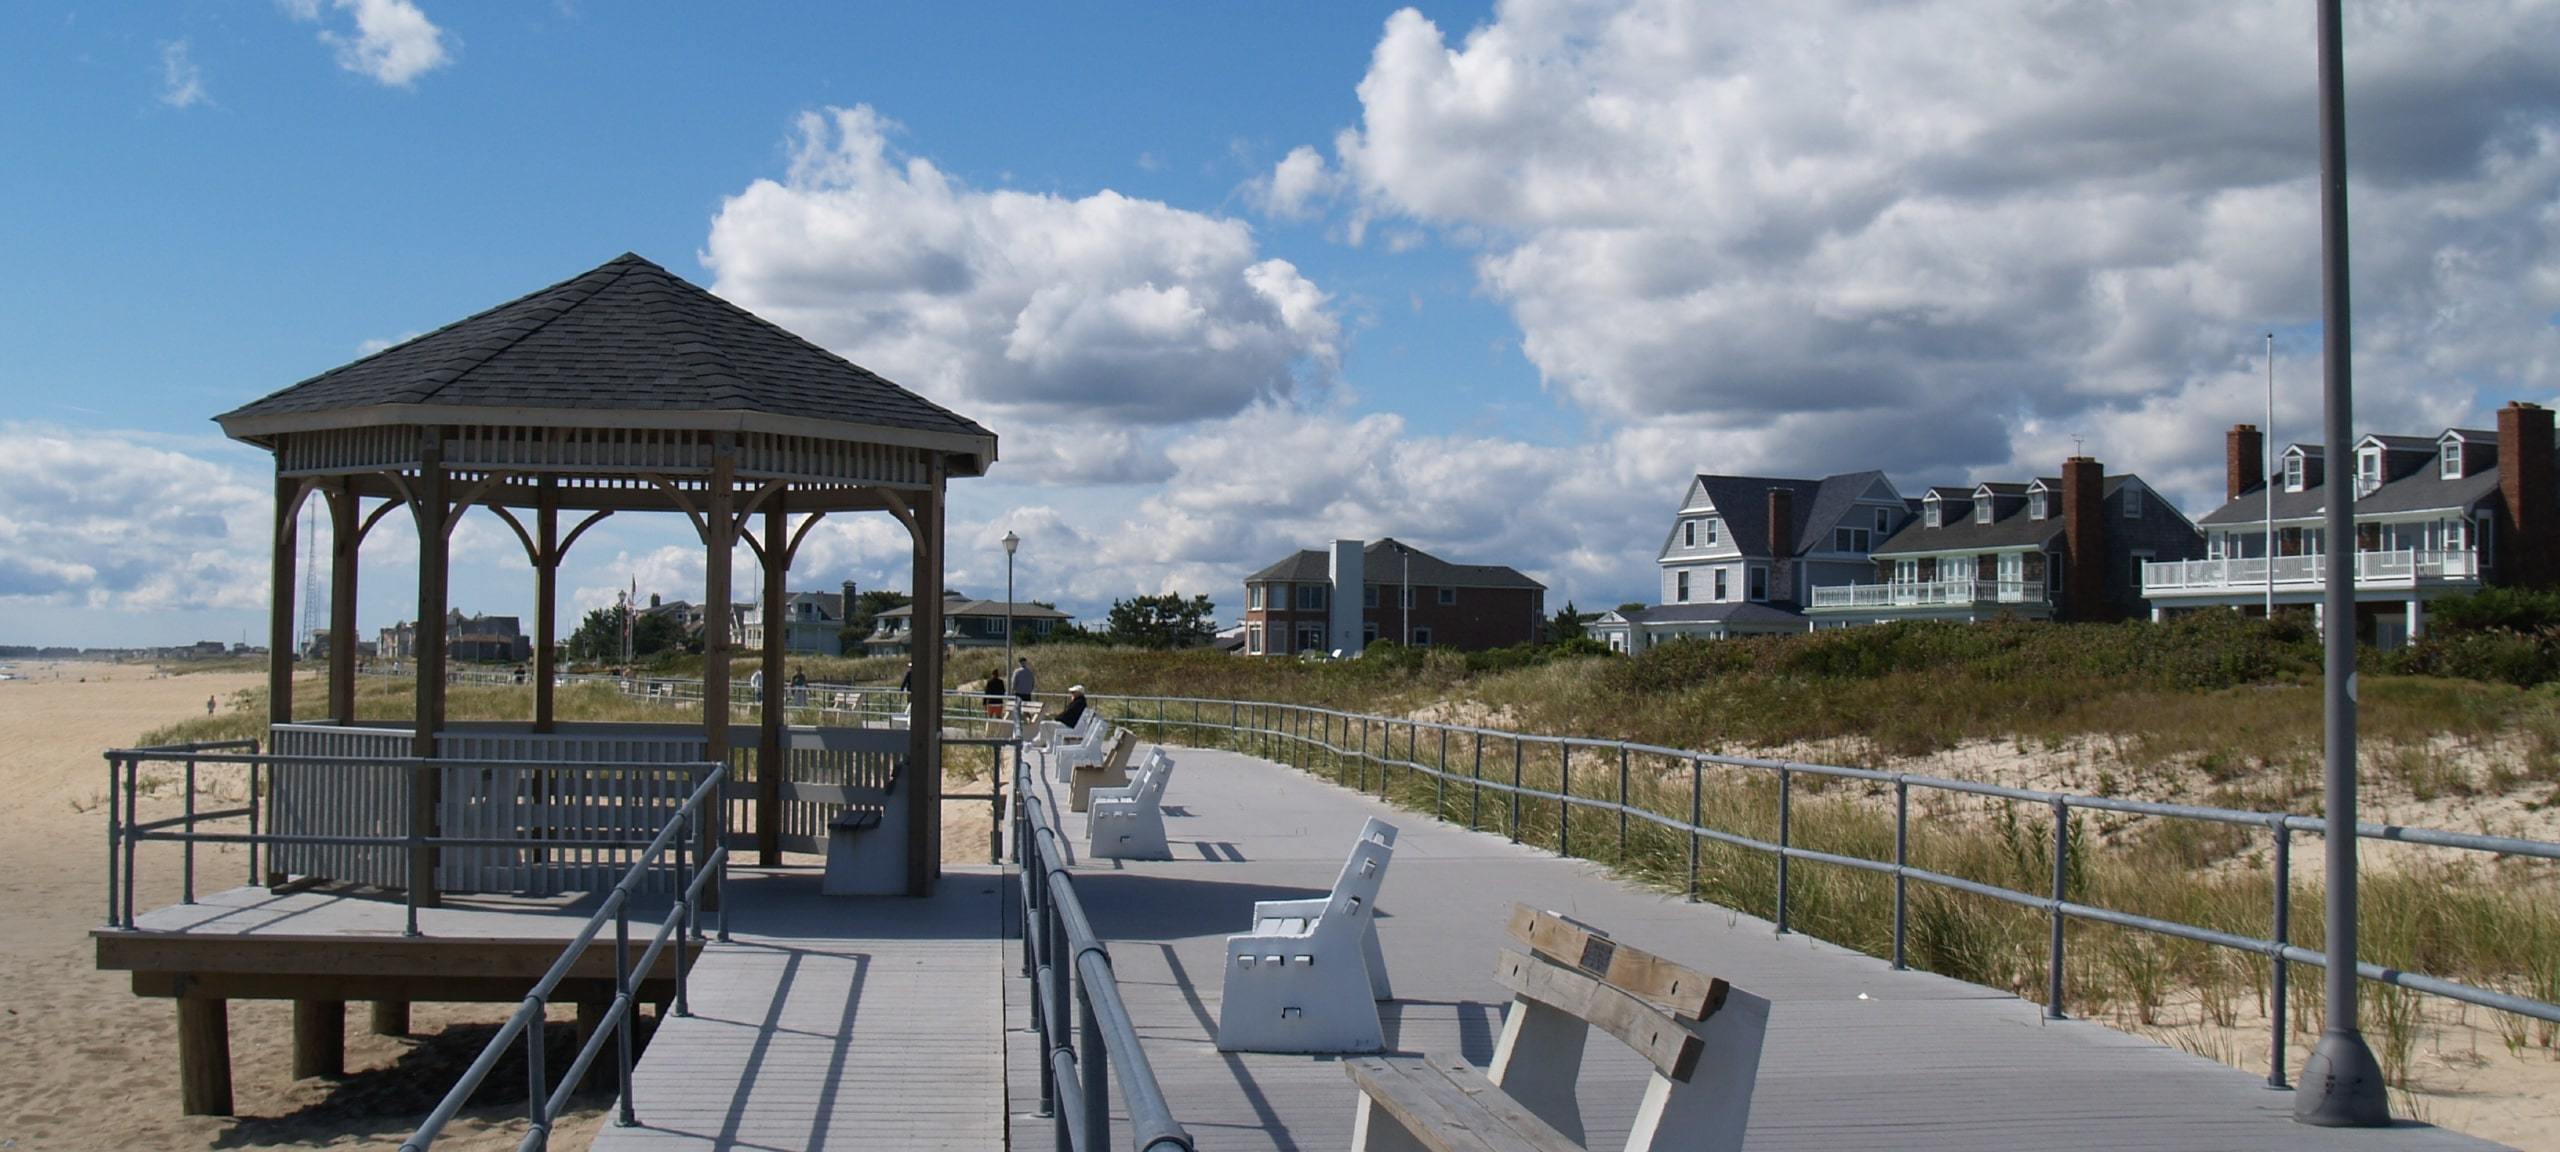 Iconic boardwalk on a sunny day with homes in distance in Sea Girt, NJ